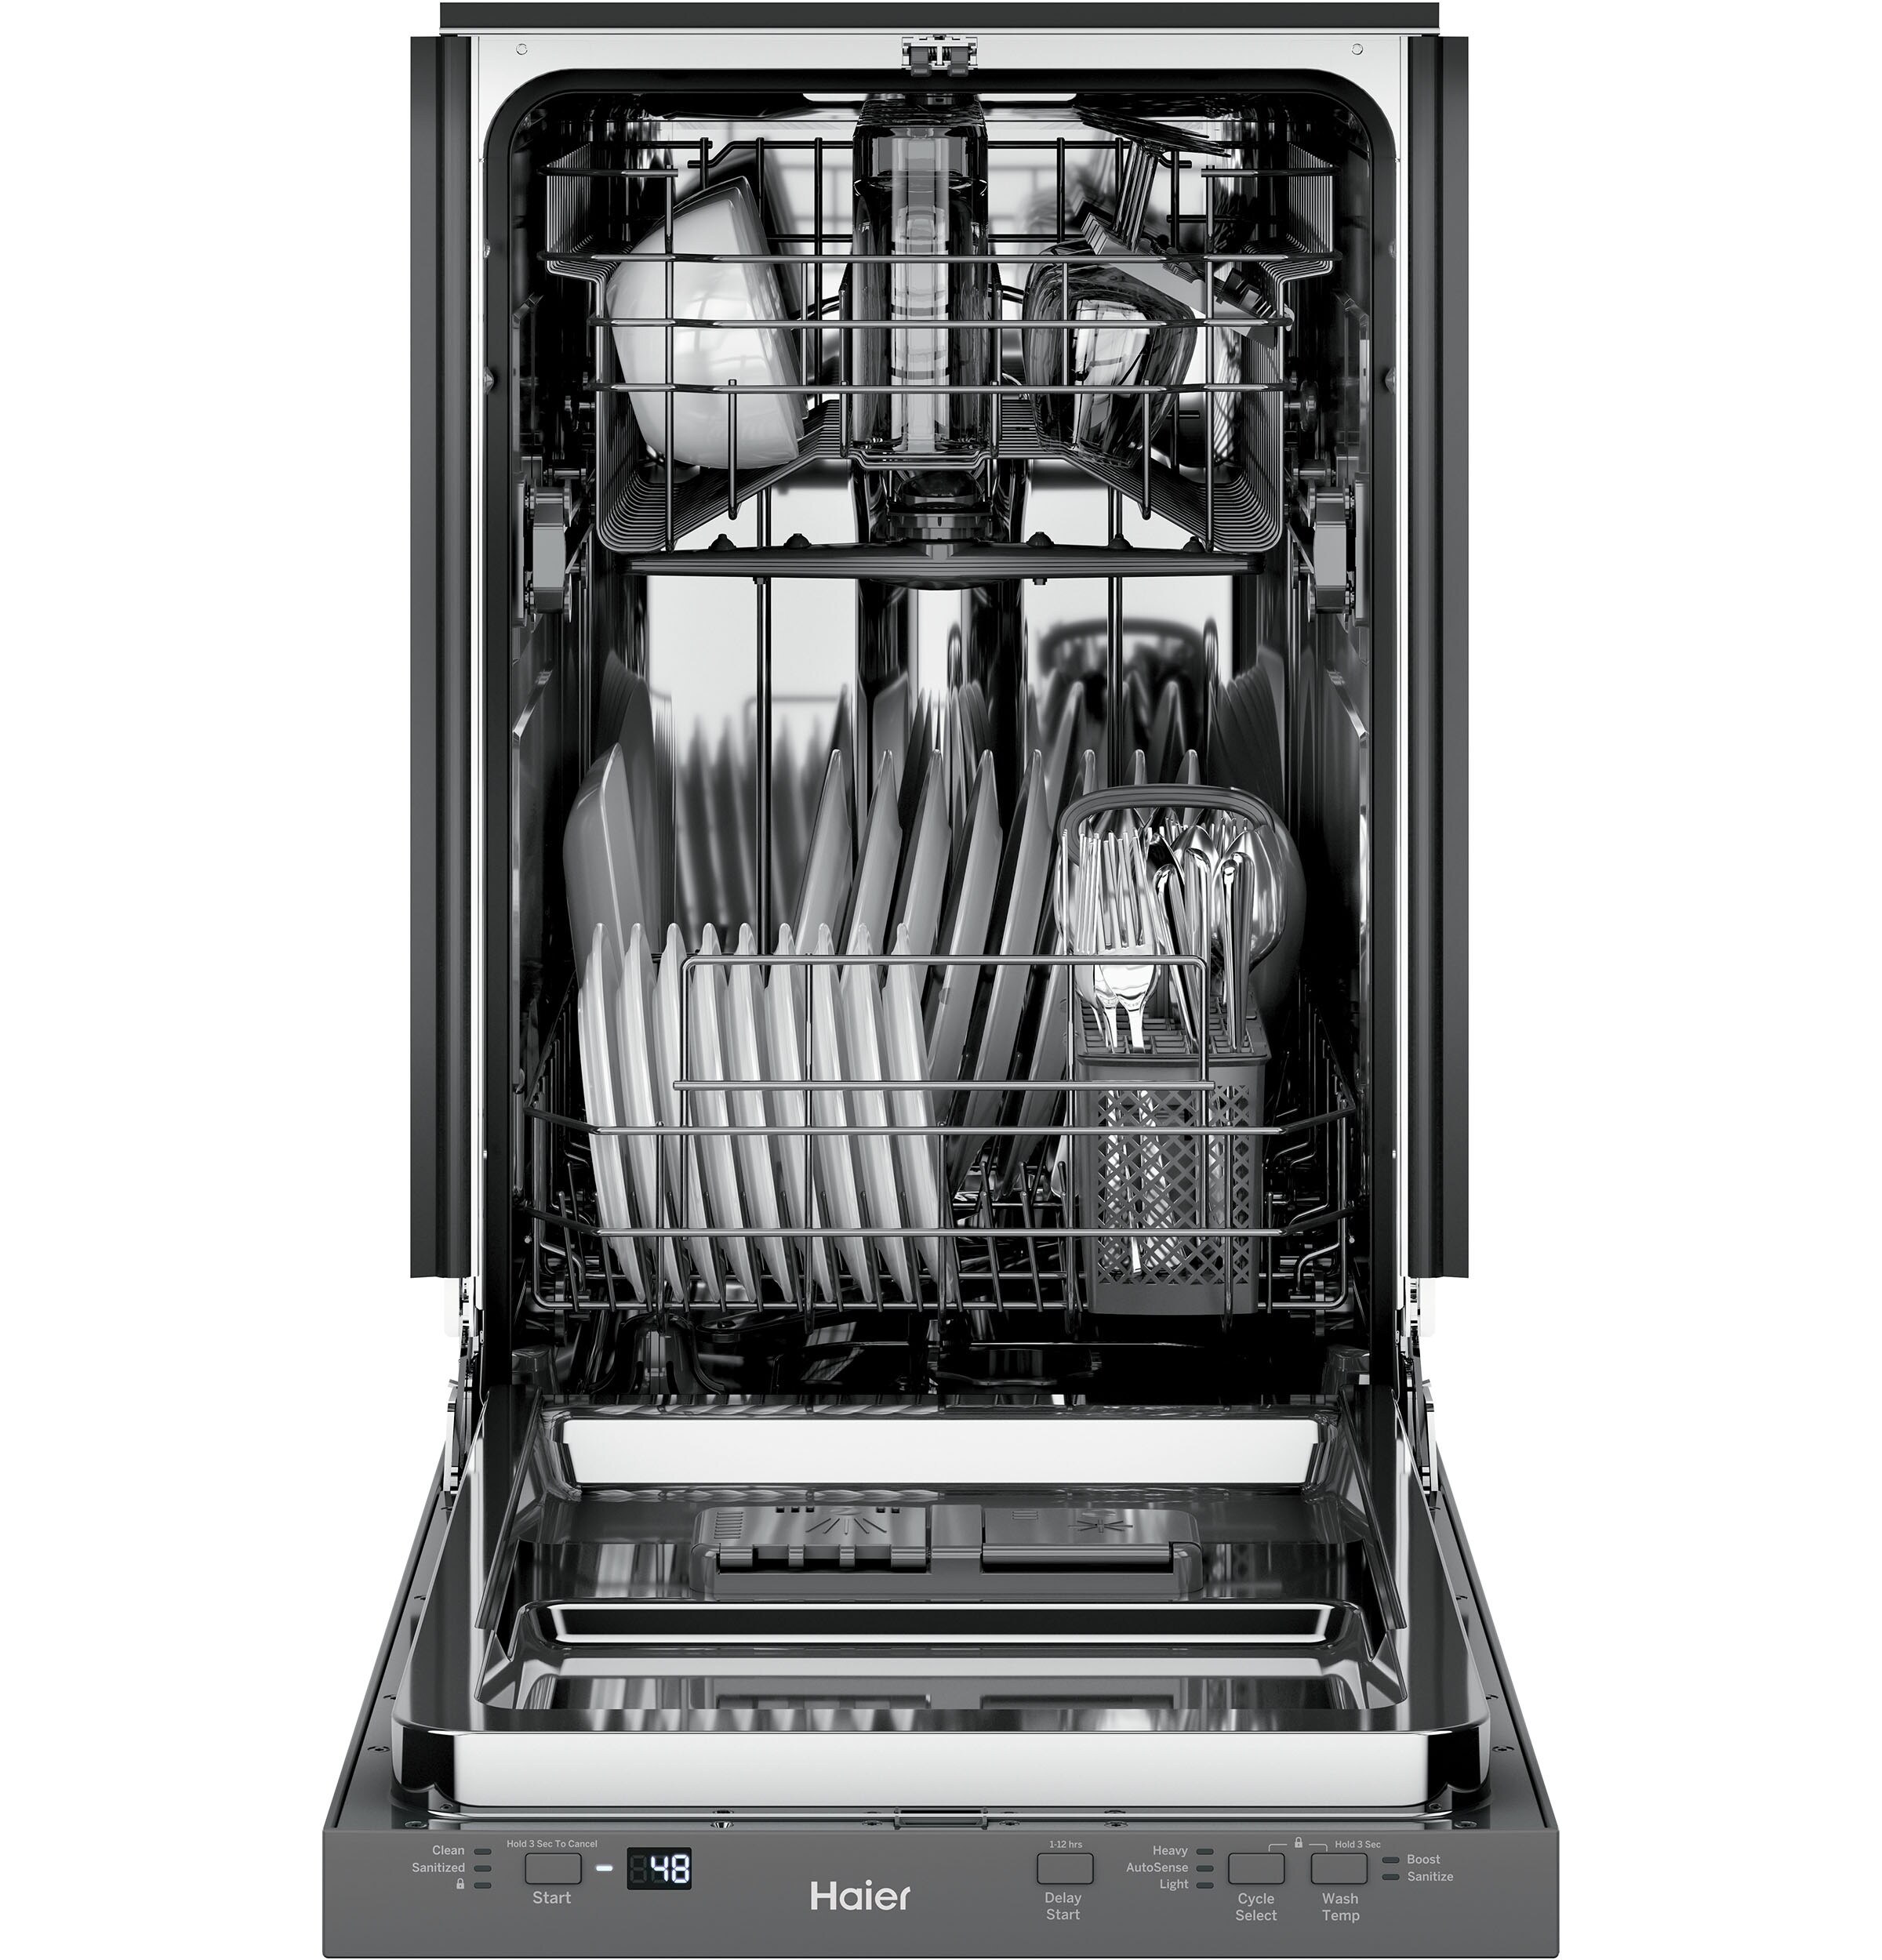 Haier 47-Decibel Top Control 18-in Built-In Dishwasher (Stainless Steel)  ENERGY STAR (ADA Compliant)